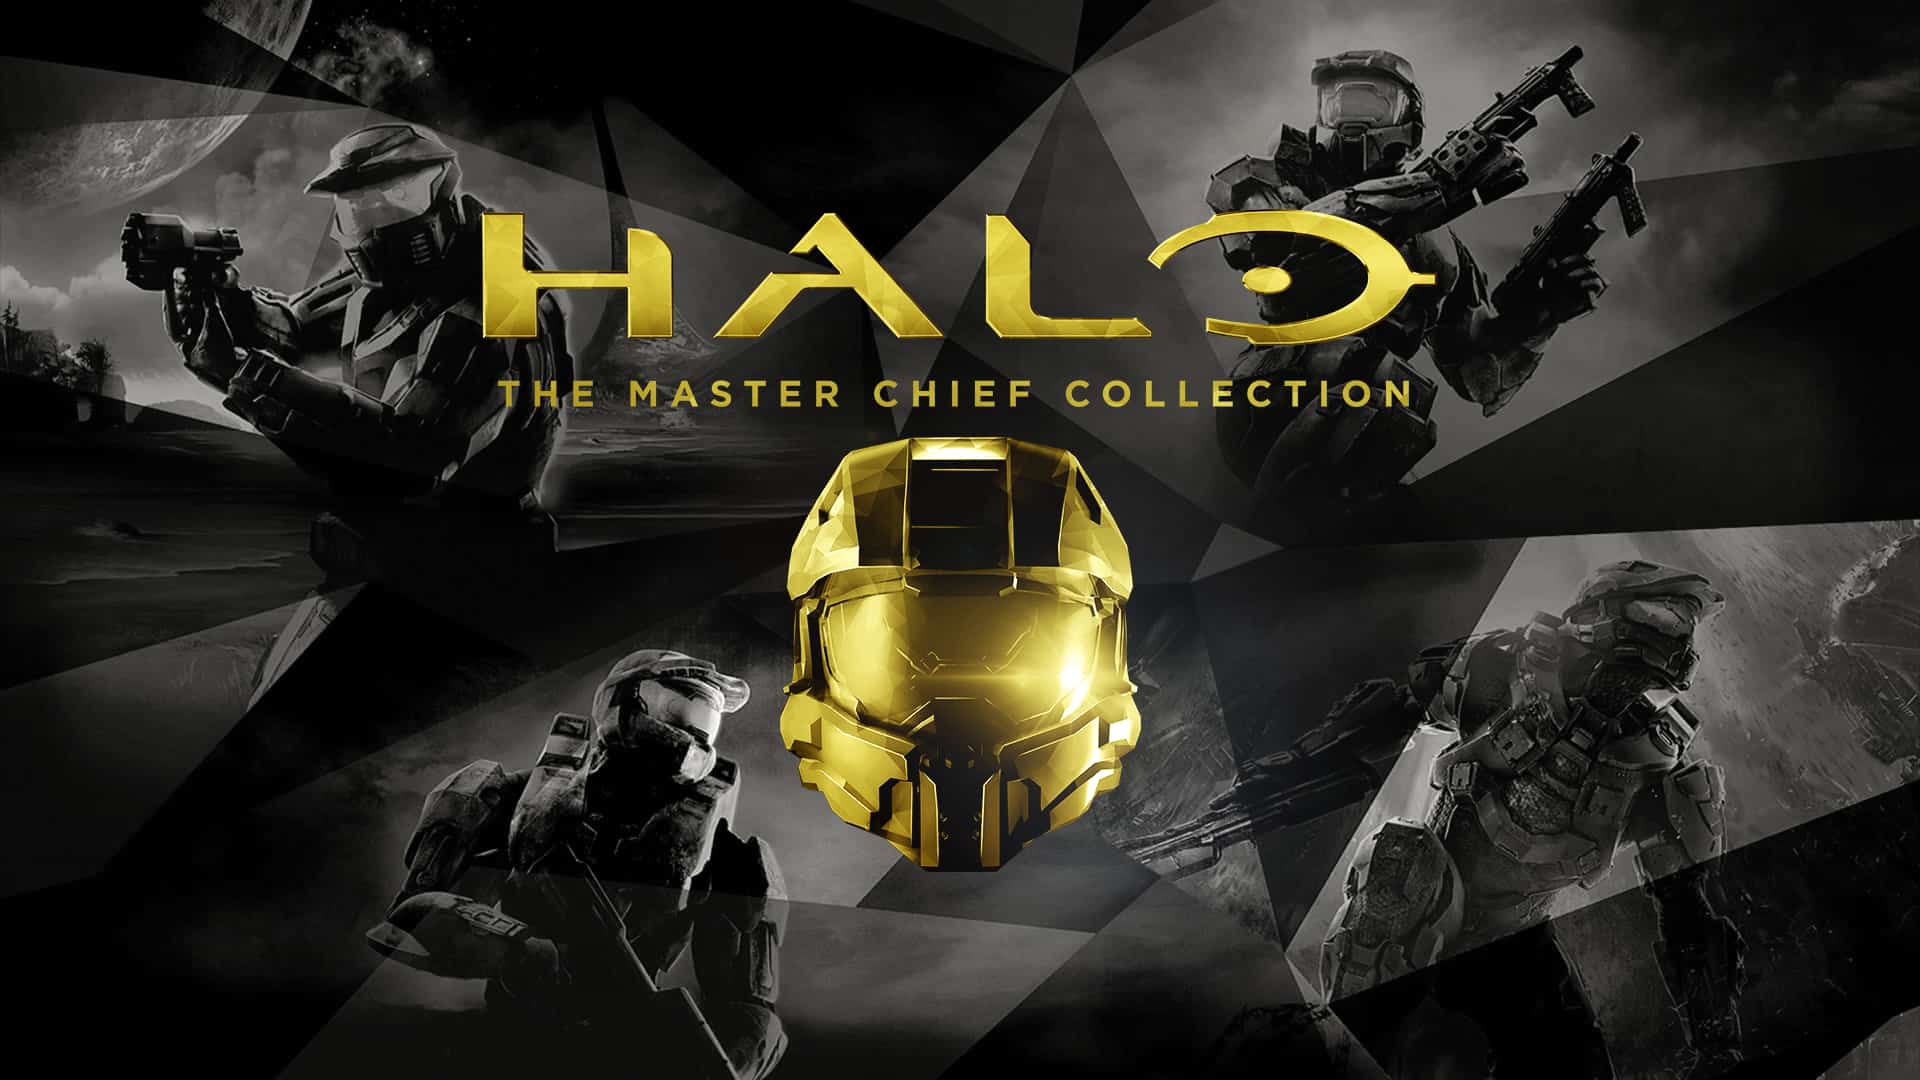 Halo: Die Master Chief Collection